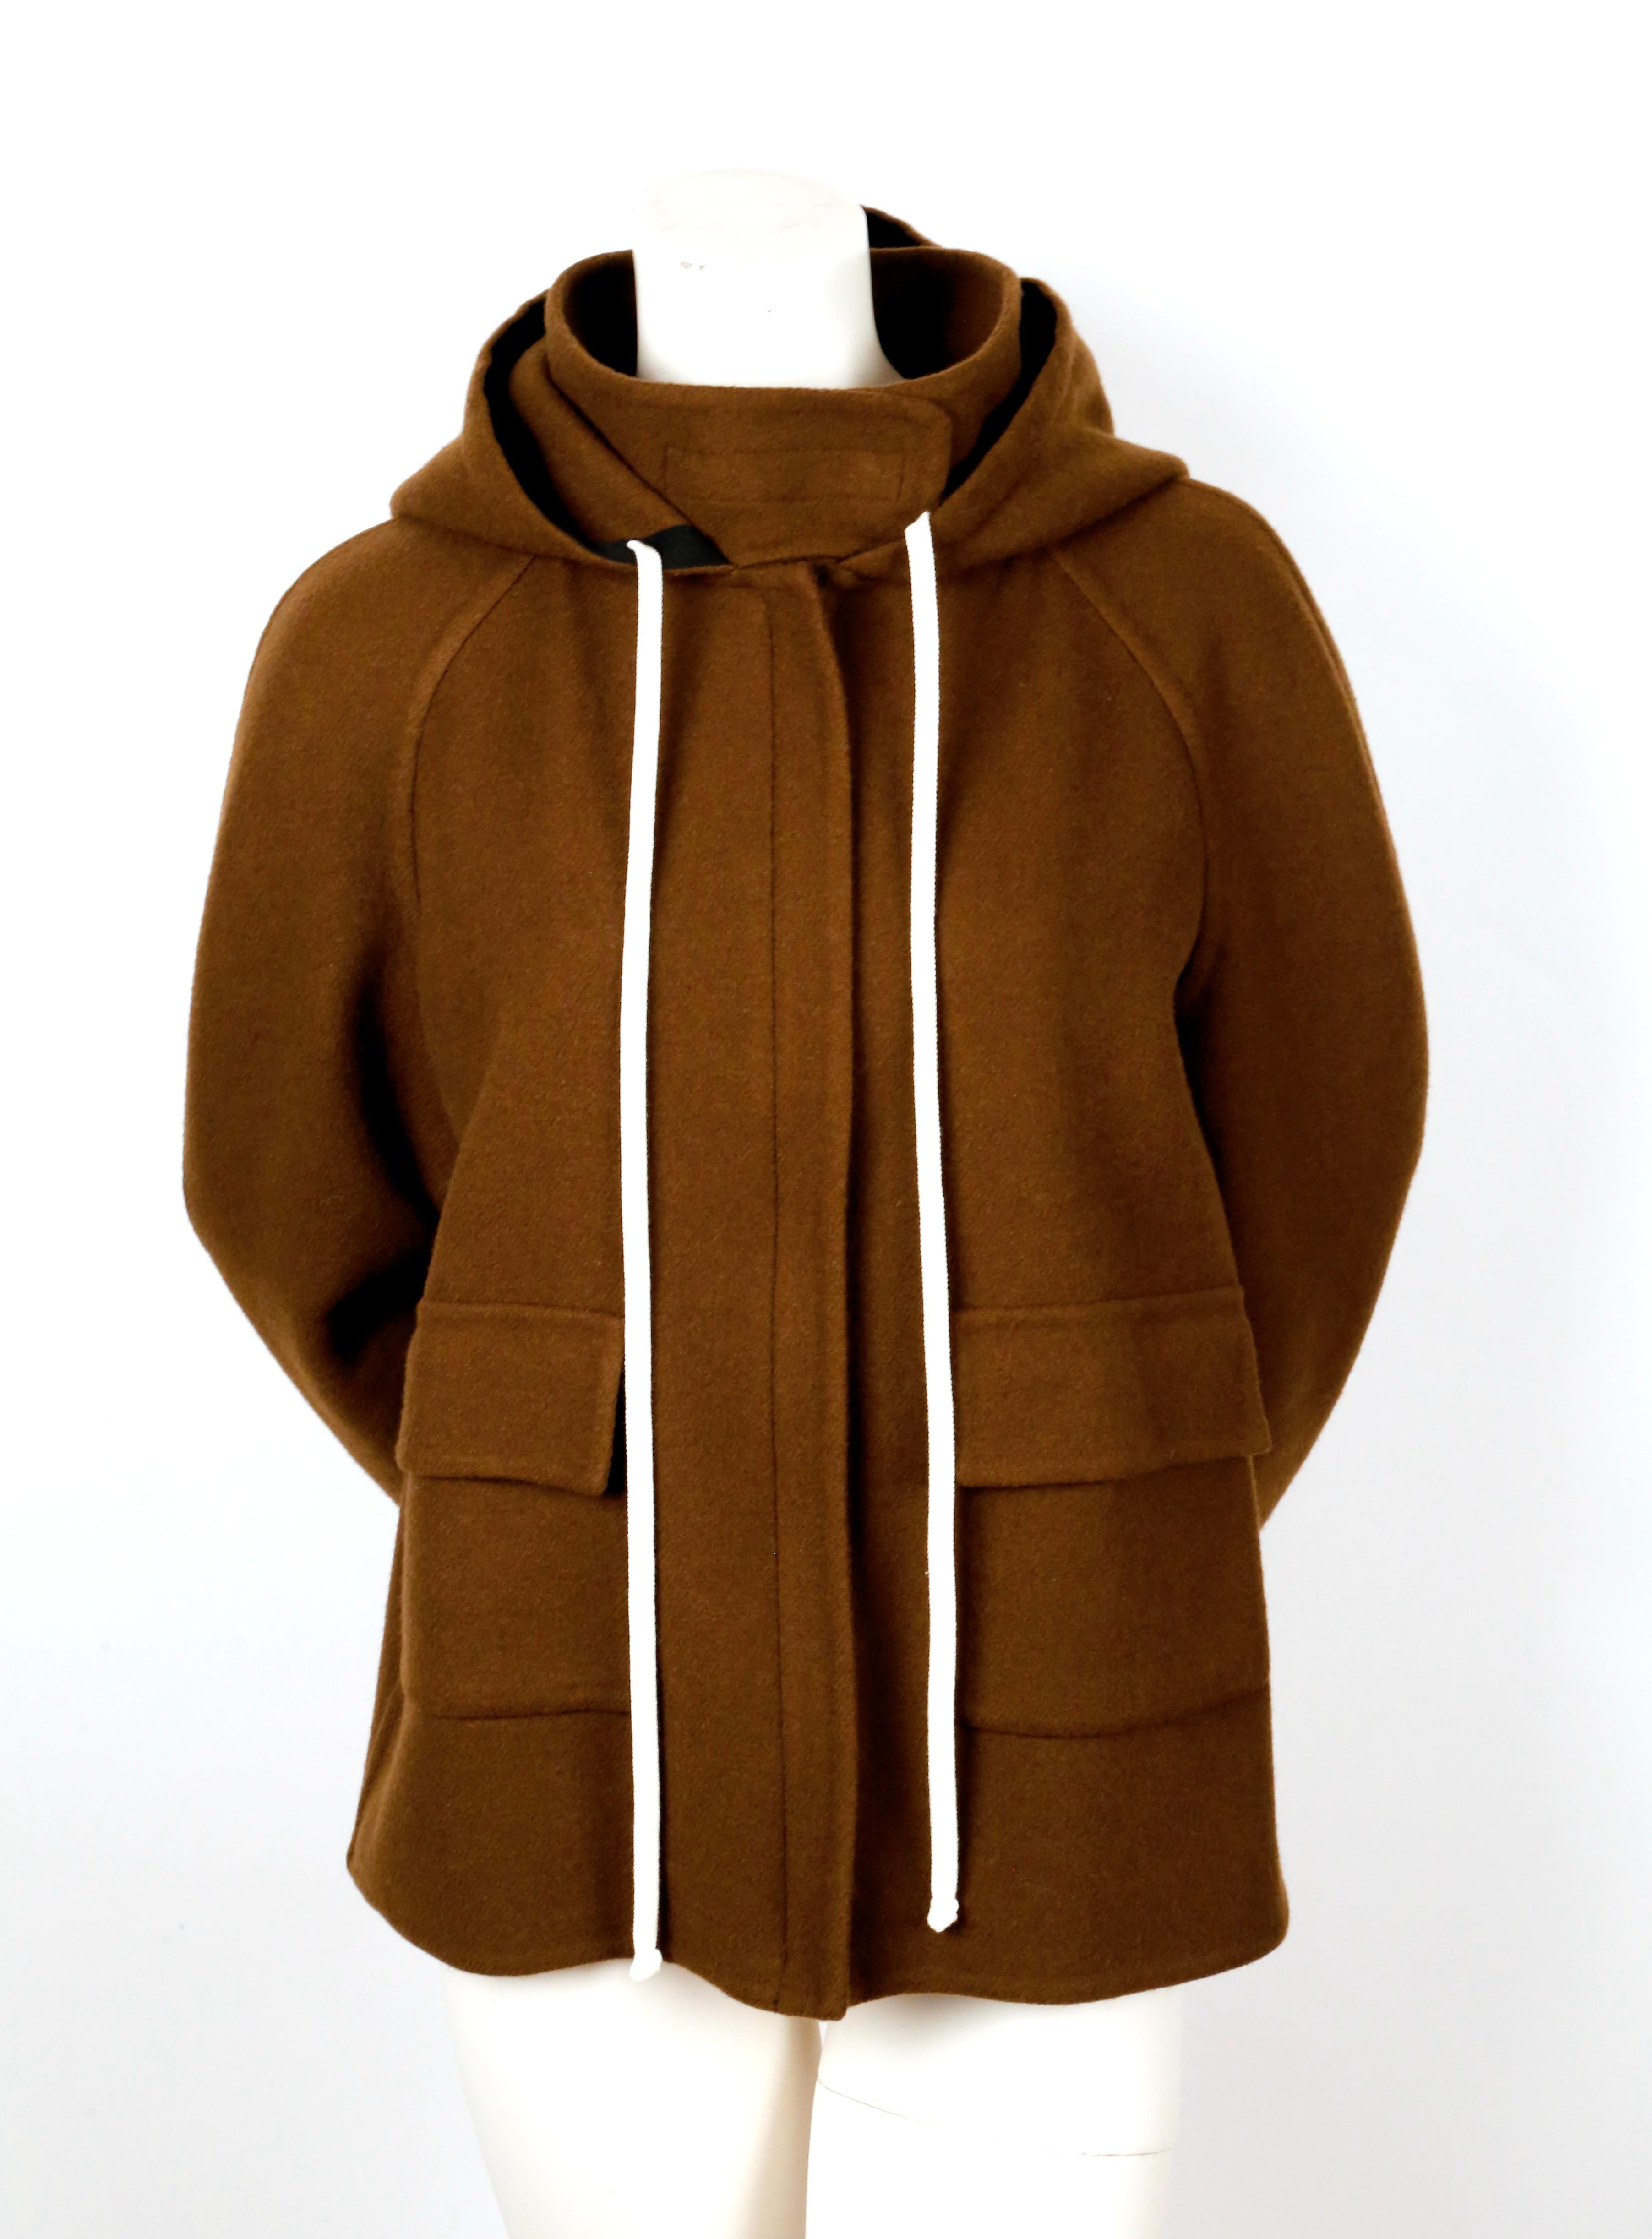 Brown, double-faced cashmere jacket with hood and patch pockets designed by Phoebe Philo for Celine as seen in the pre-fall collection of 2014. French size 38. Approximate measurements: bust 42